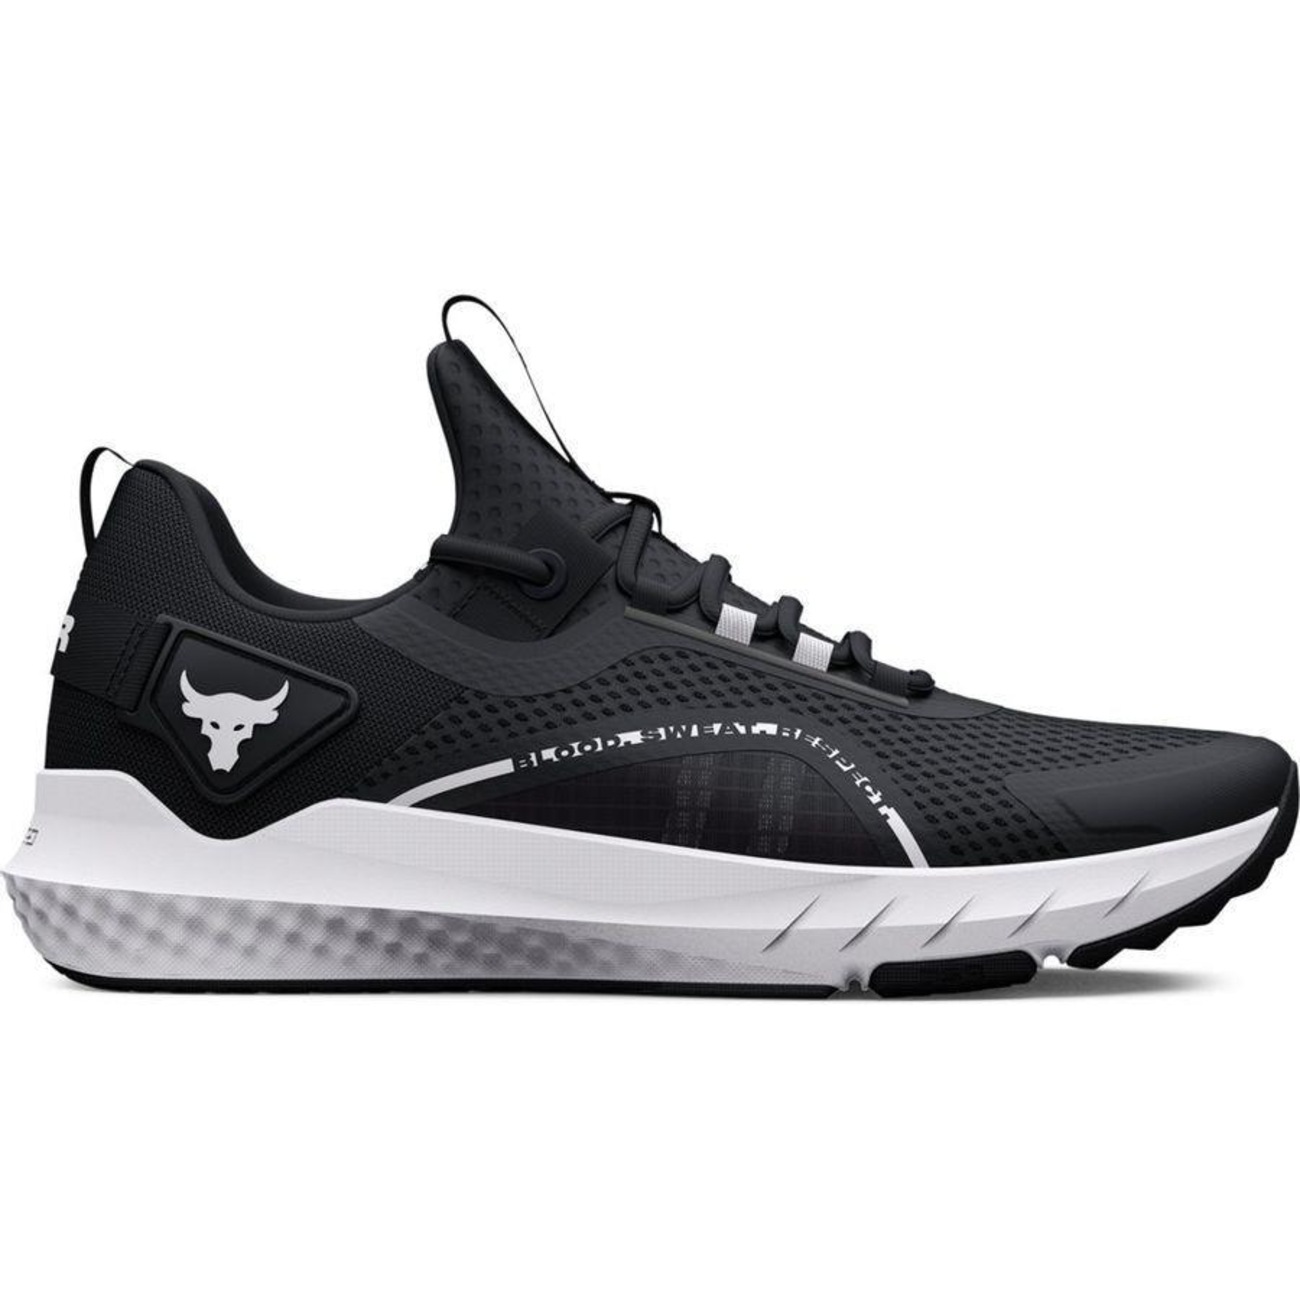 Tênis Under Armour Project Rock BSR 3 - Masculino